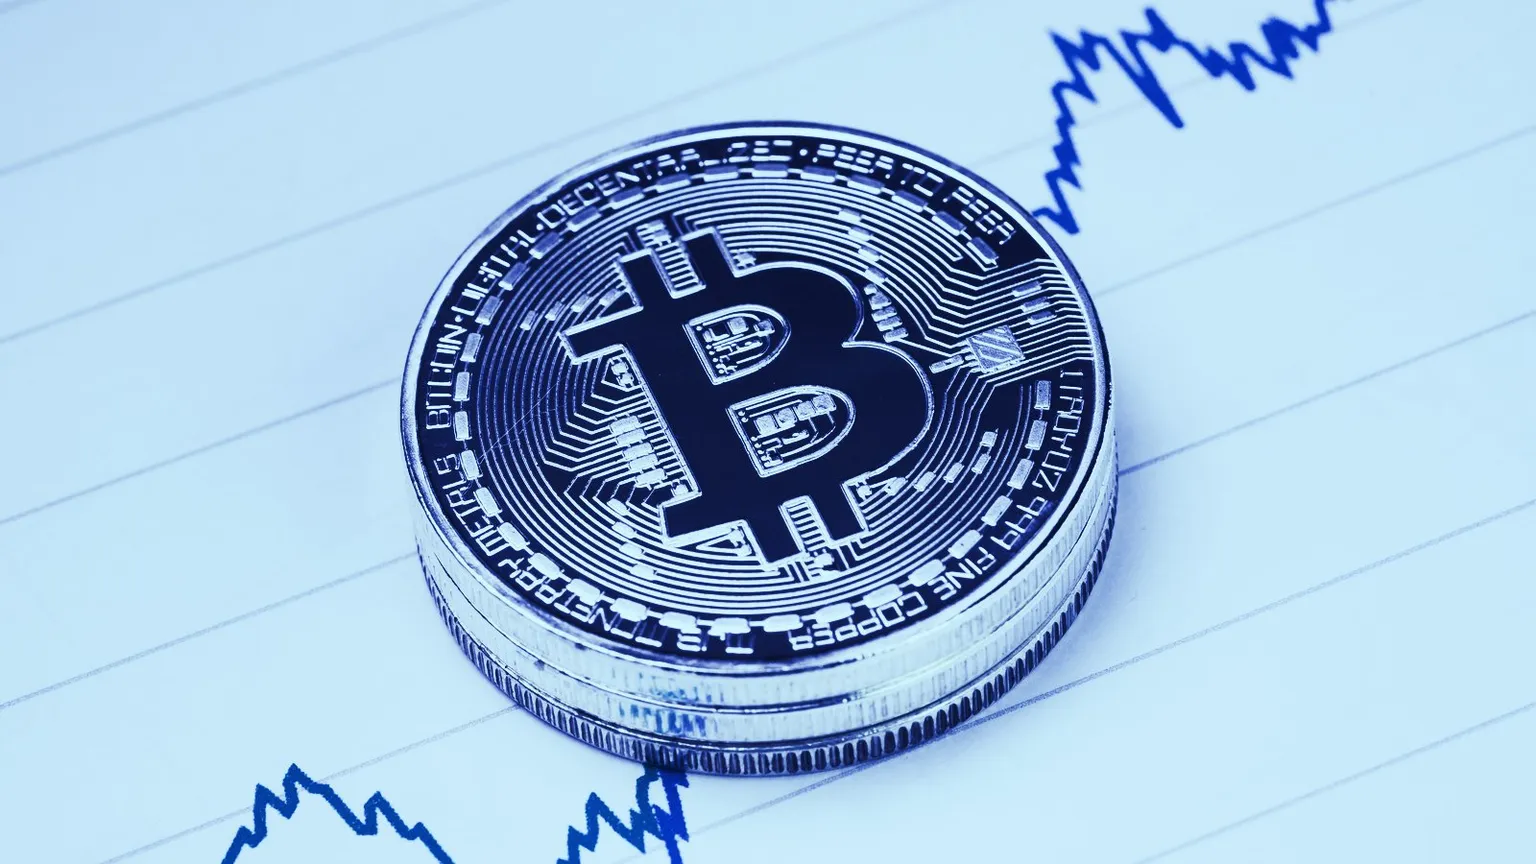 Bitcoin's price: It go up! It go down! It go all around! Image: Shutterstock